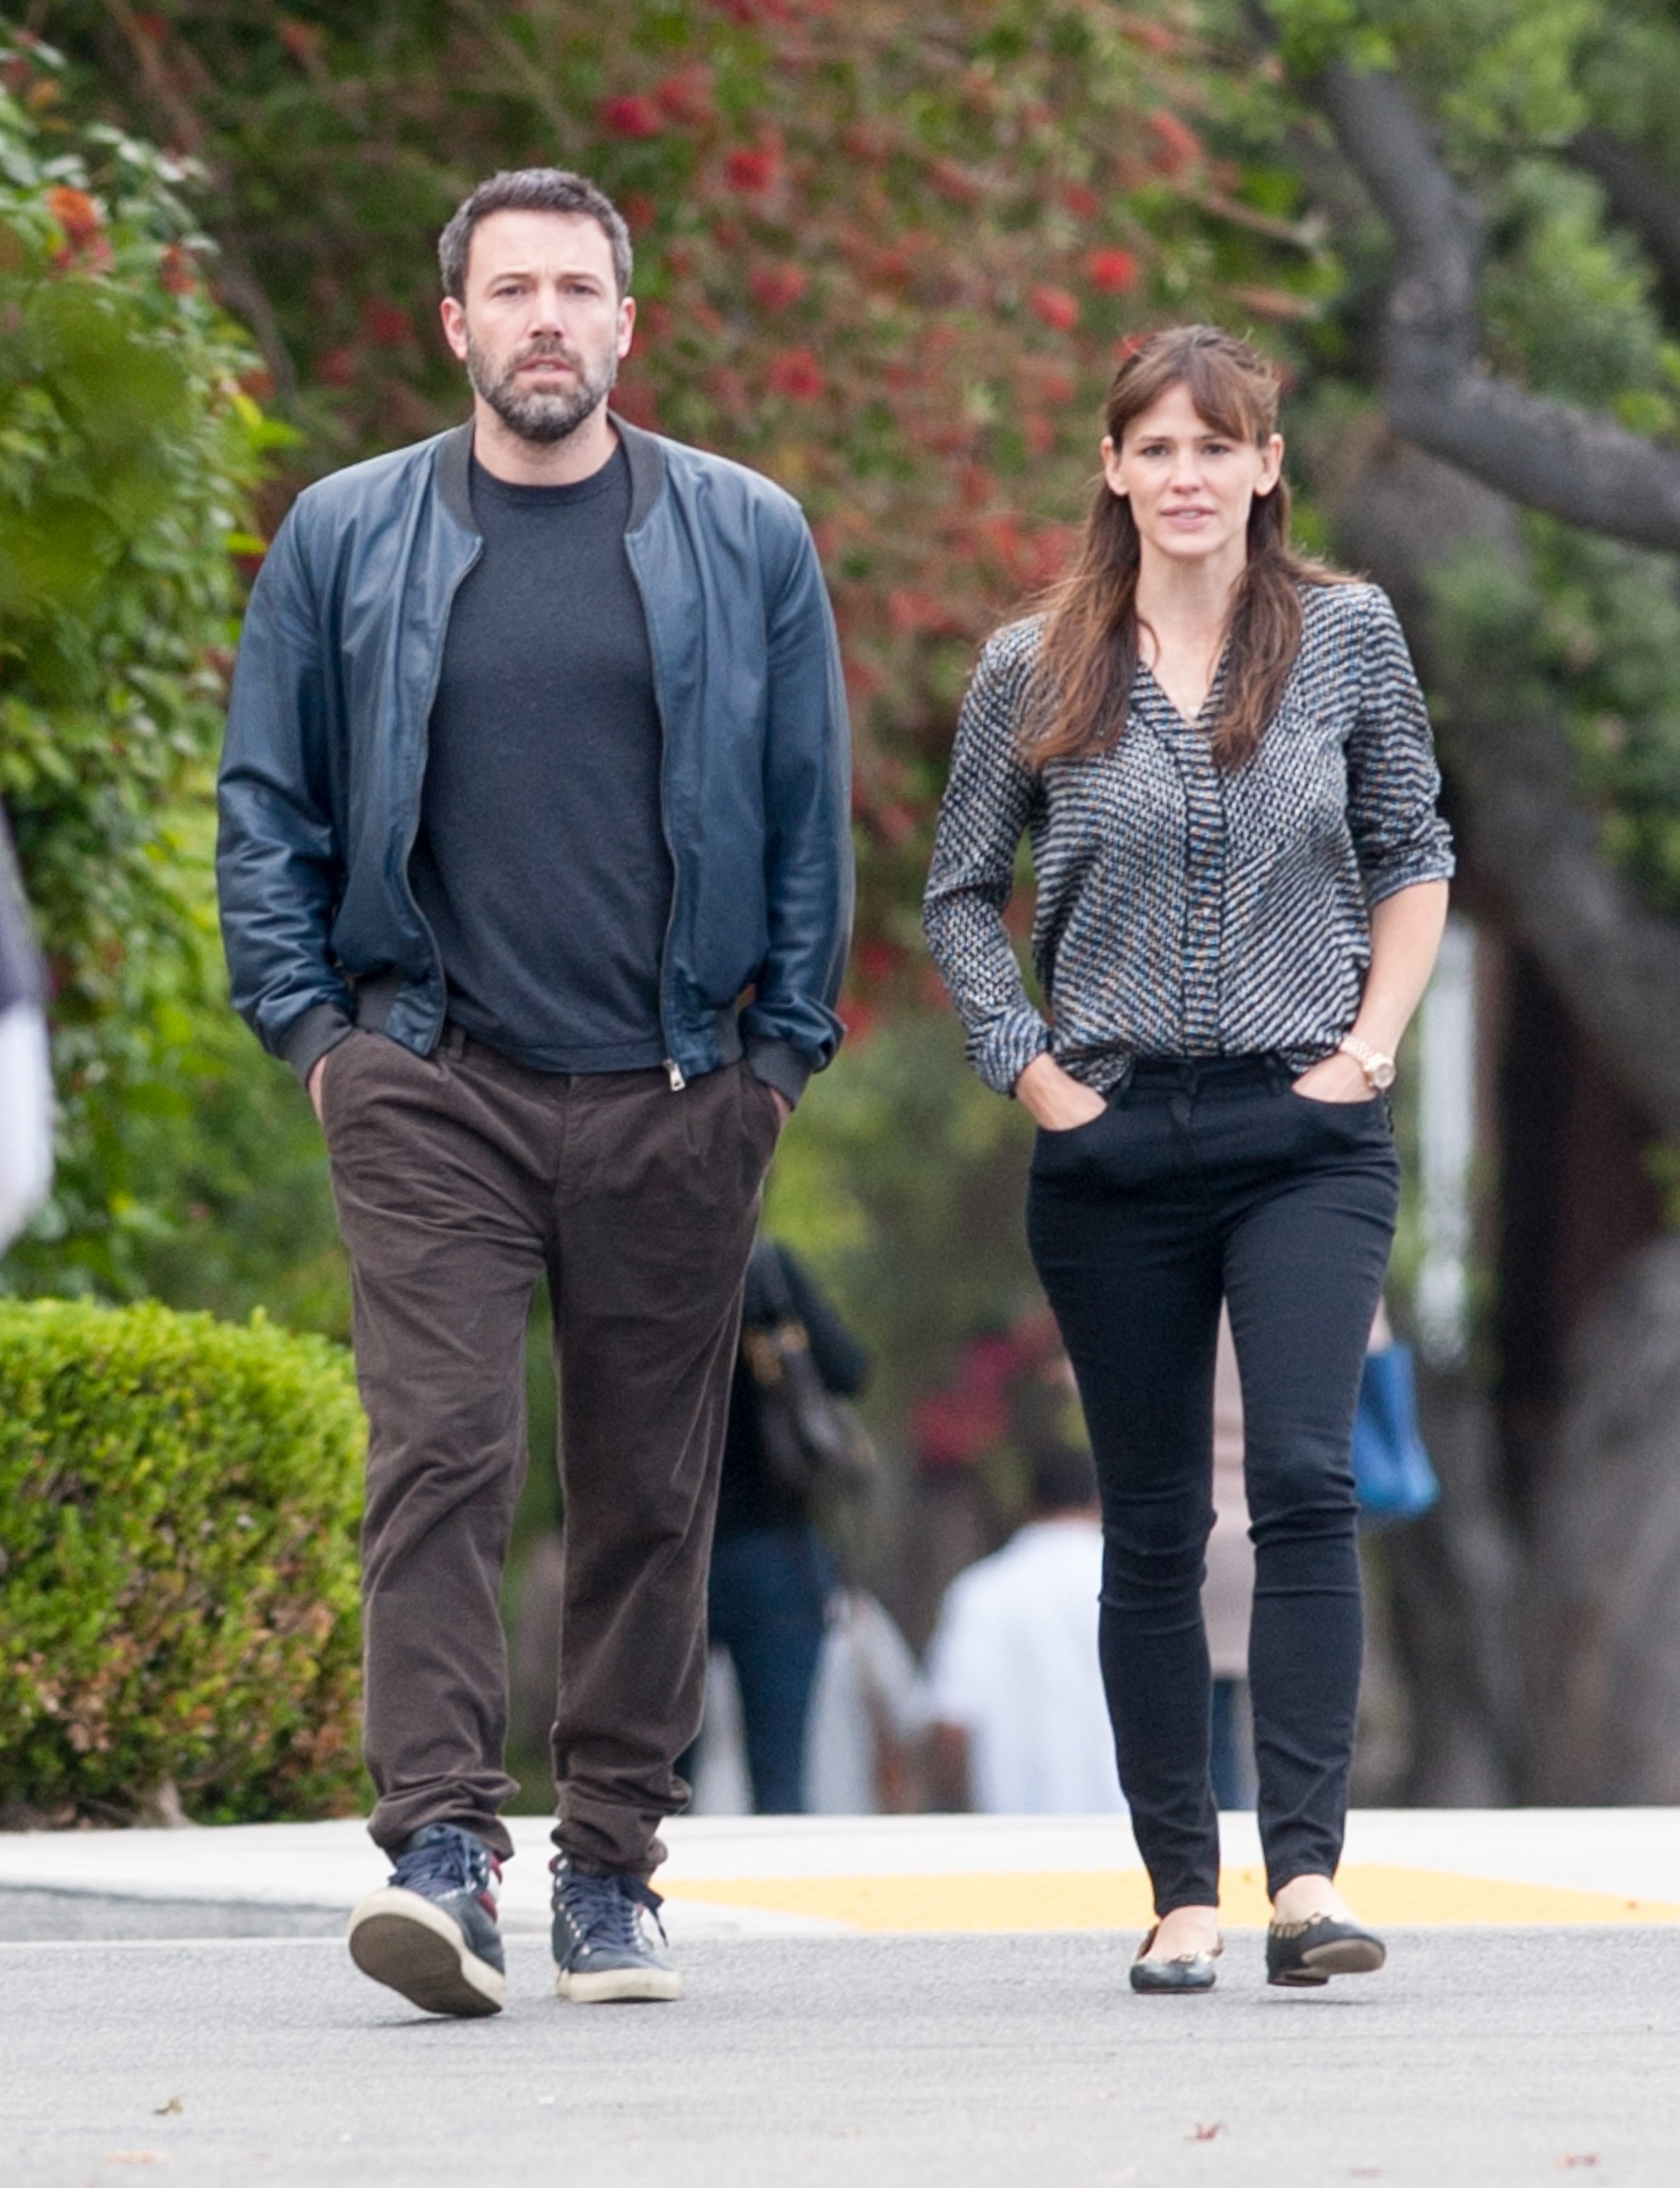 Ben Affleck and Jennifer Garner are seen in Brentwood on April 24, 2015 in Los Angeles, California. | Source: Getty Images